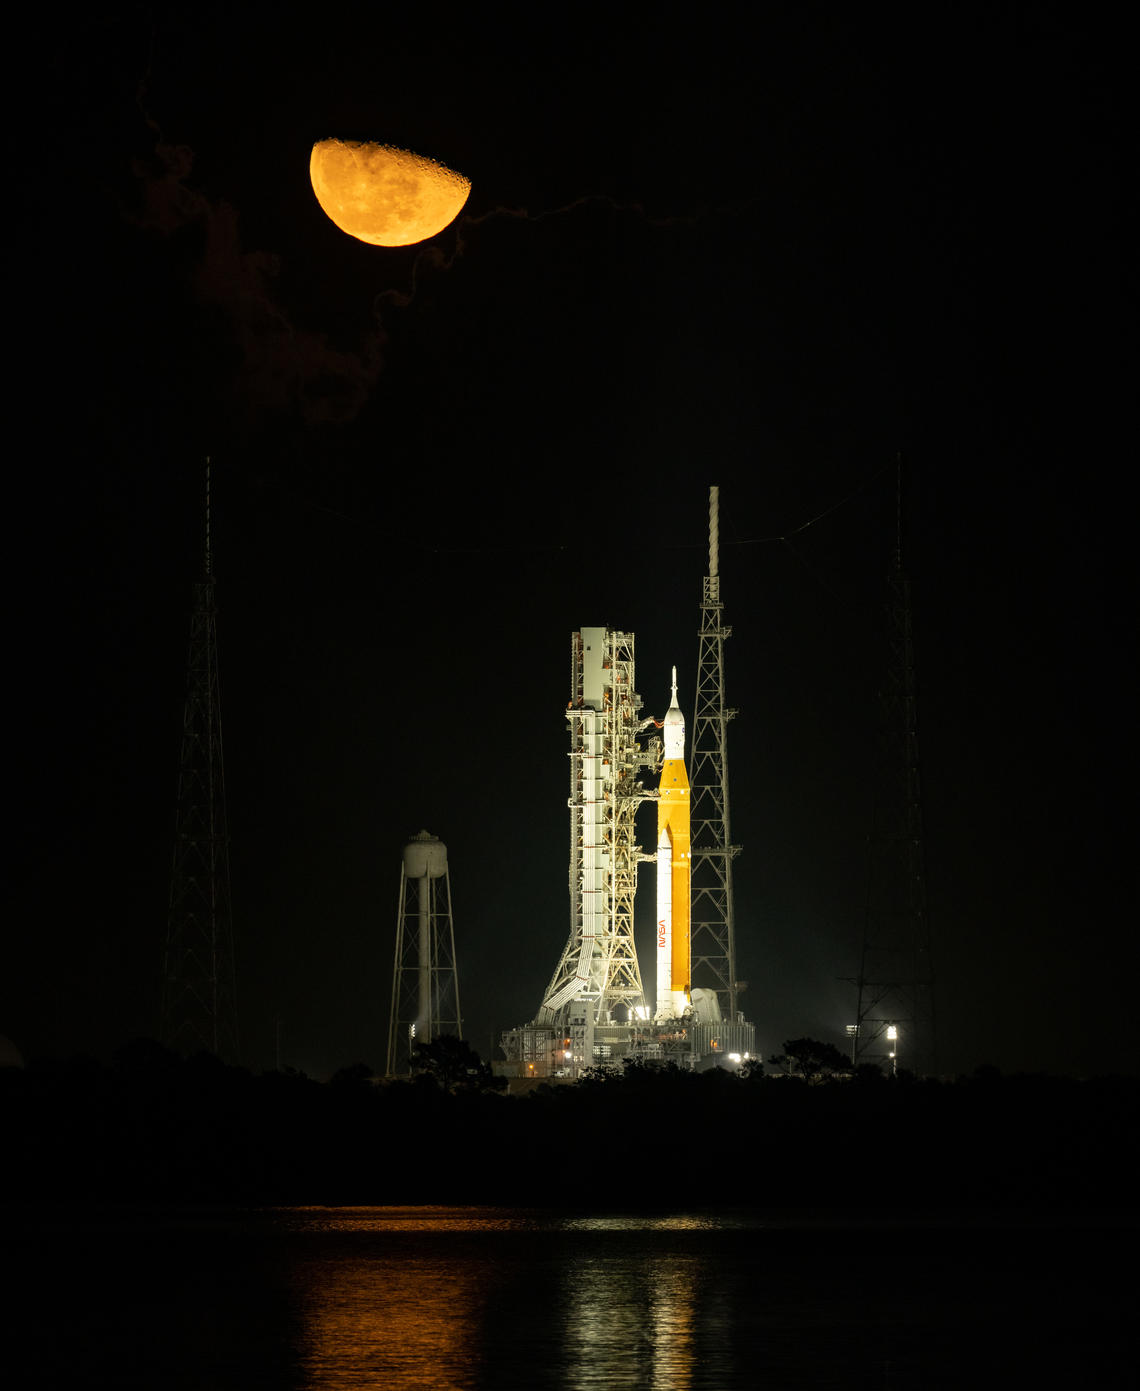 The Moon is seen rising above NASA’s Space Launch System (SLS) rocket with the Orion spacecraft aboard at Launch Pad 39B as preparations for launch continue, Monday, Nov. 14, 2022, at NASA’s Kennedy Space Center in Florida.